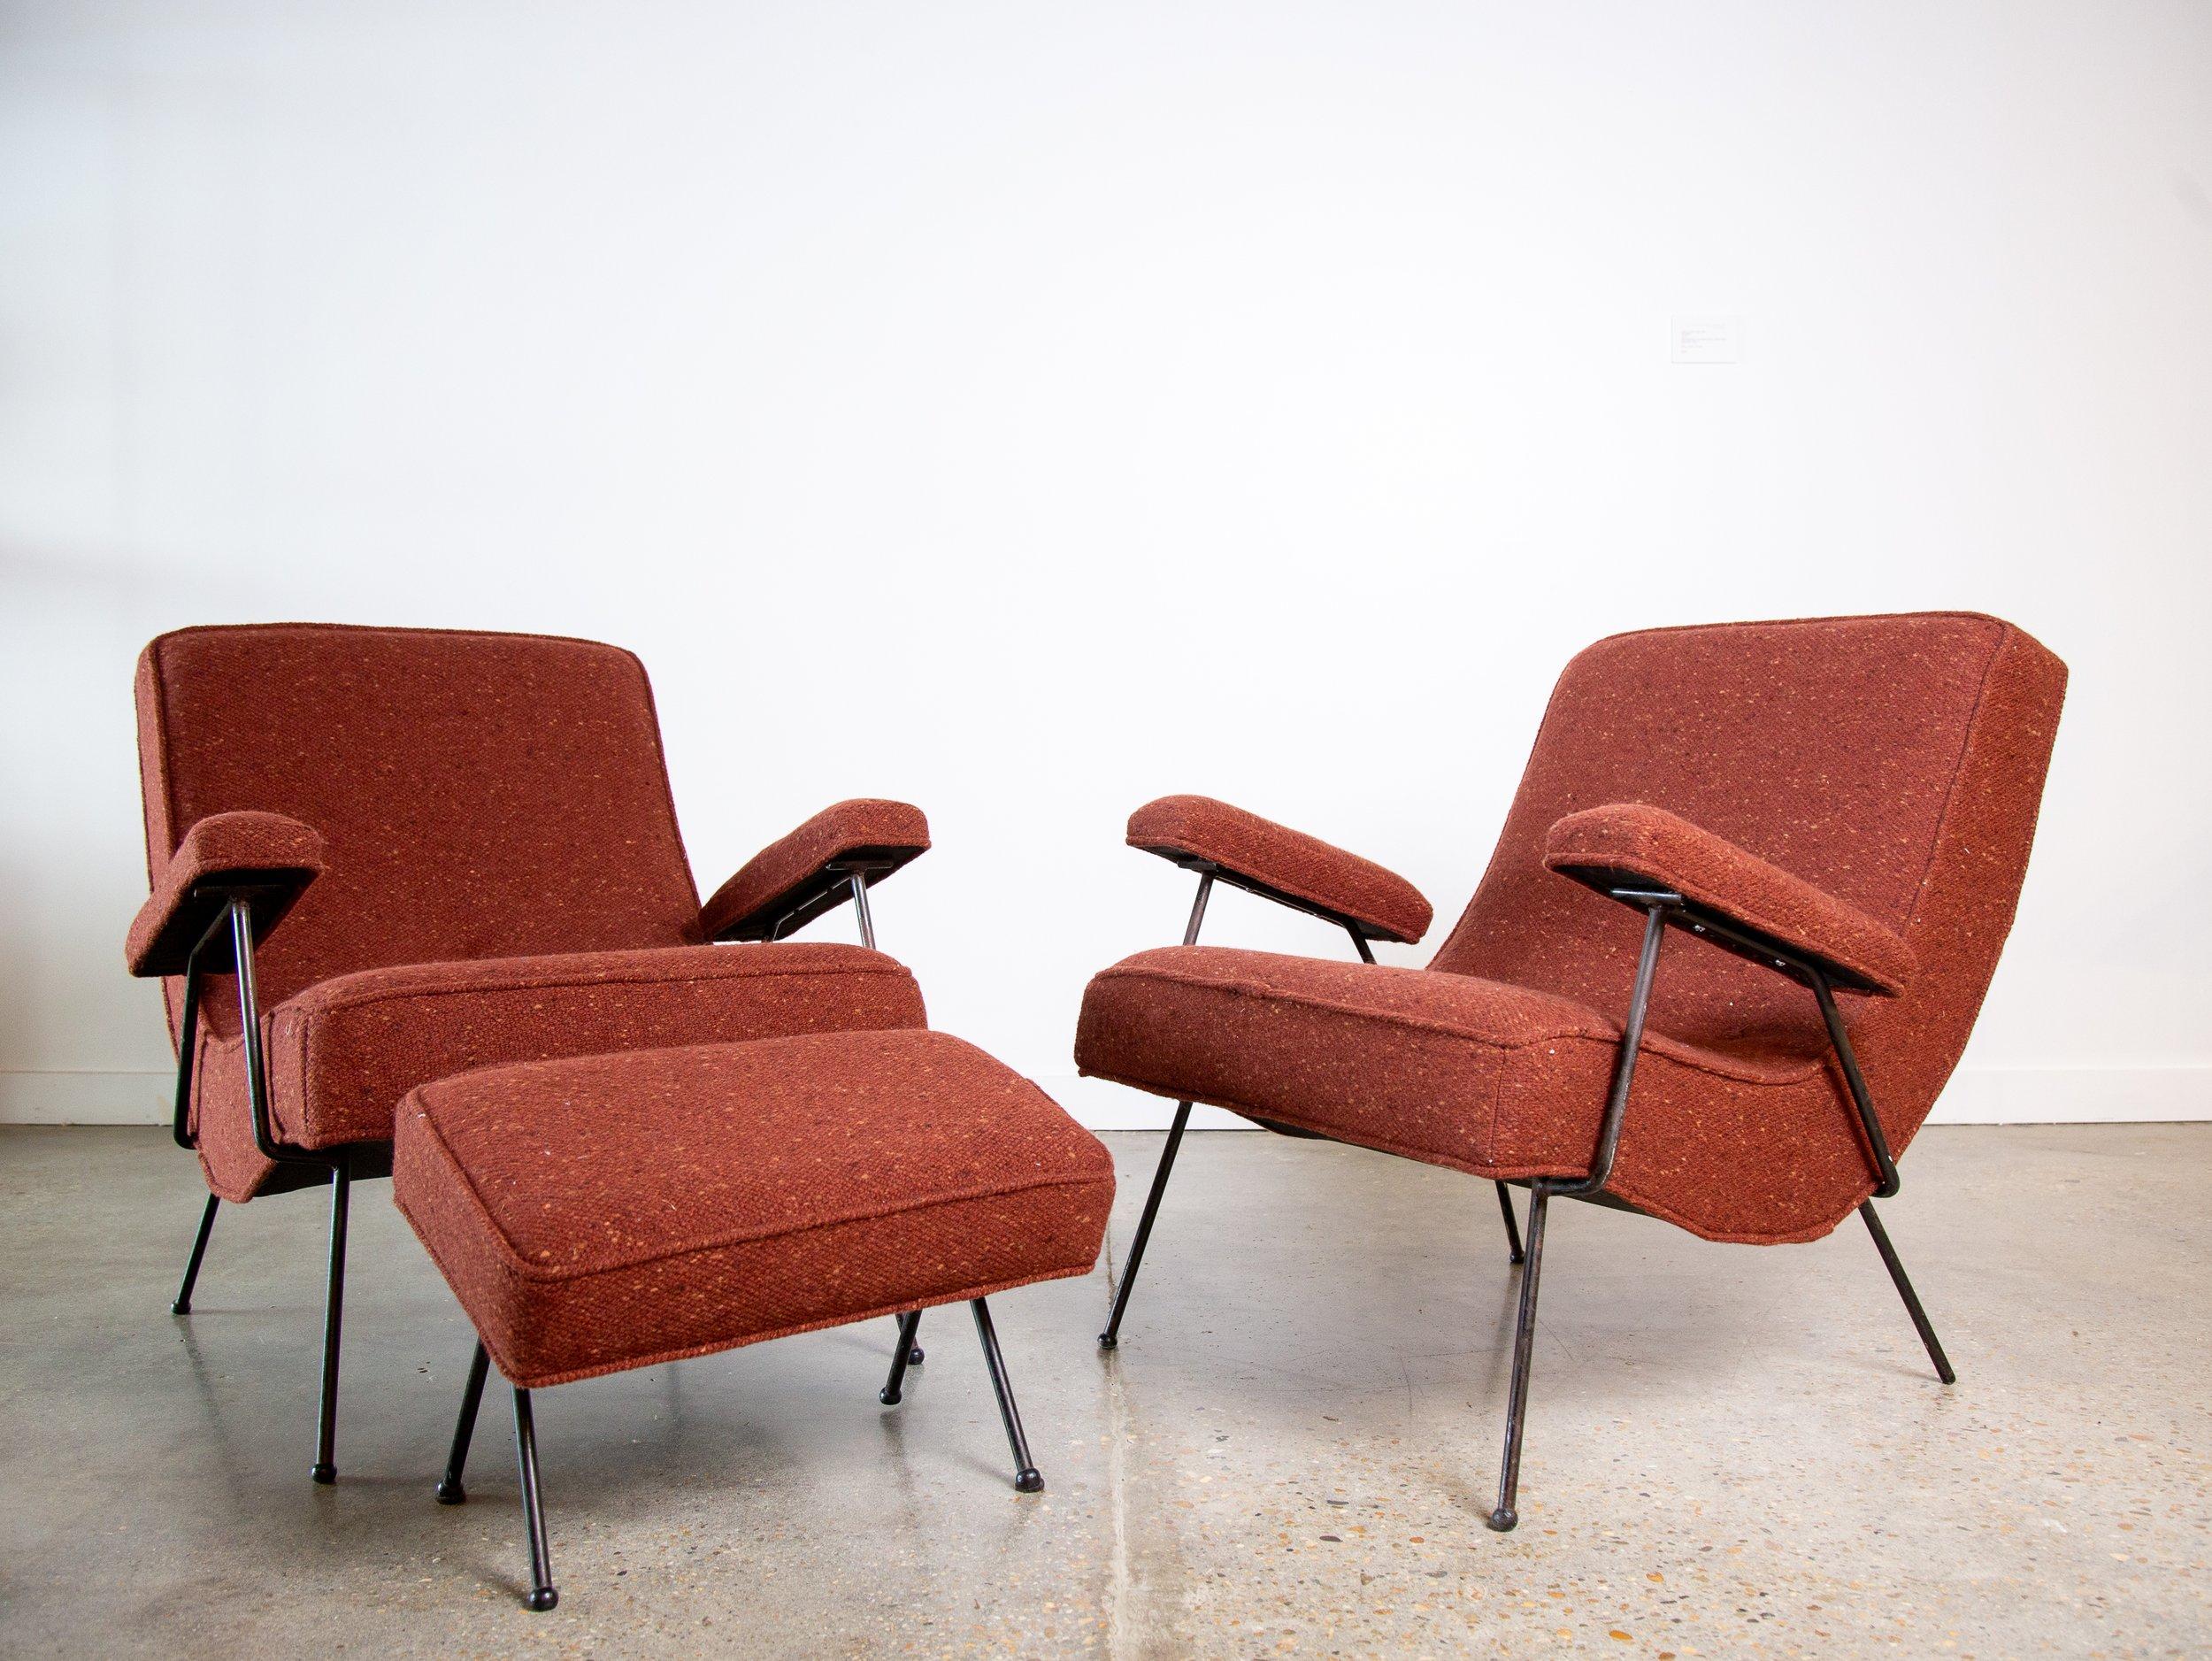 An early pair of Adrian Pearsall 109c lounge chairs for craft associates.  These early iron chairs rarely surface. These chairs came from a single family estate (picture from 1960 included). The wool upholstery and foam is newly replaced. The fabric